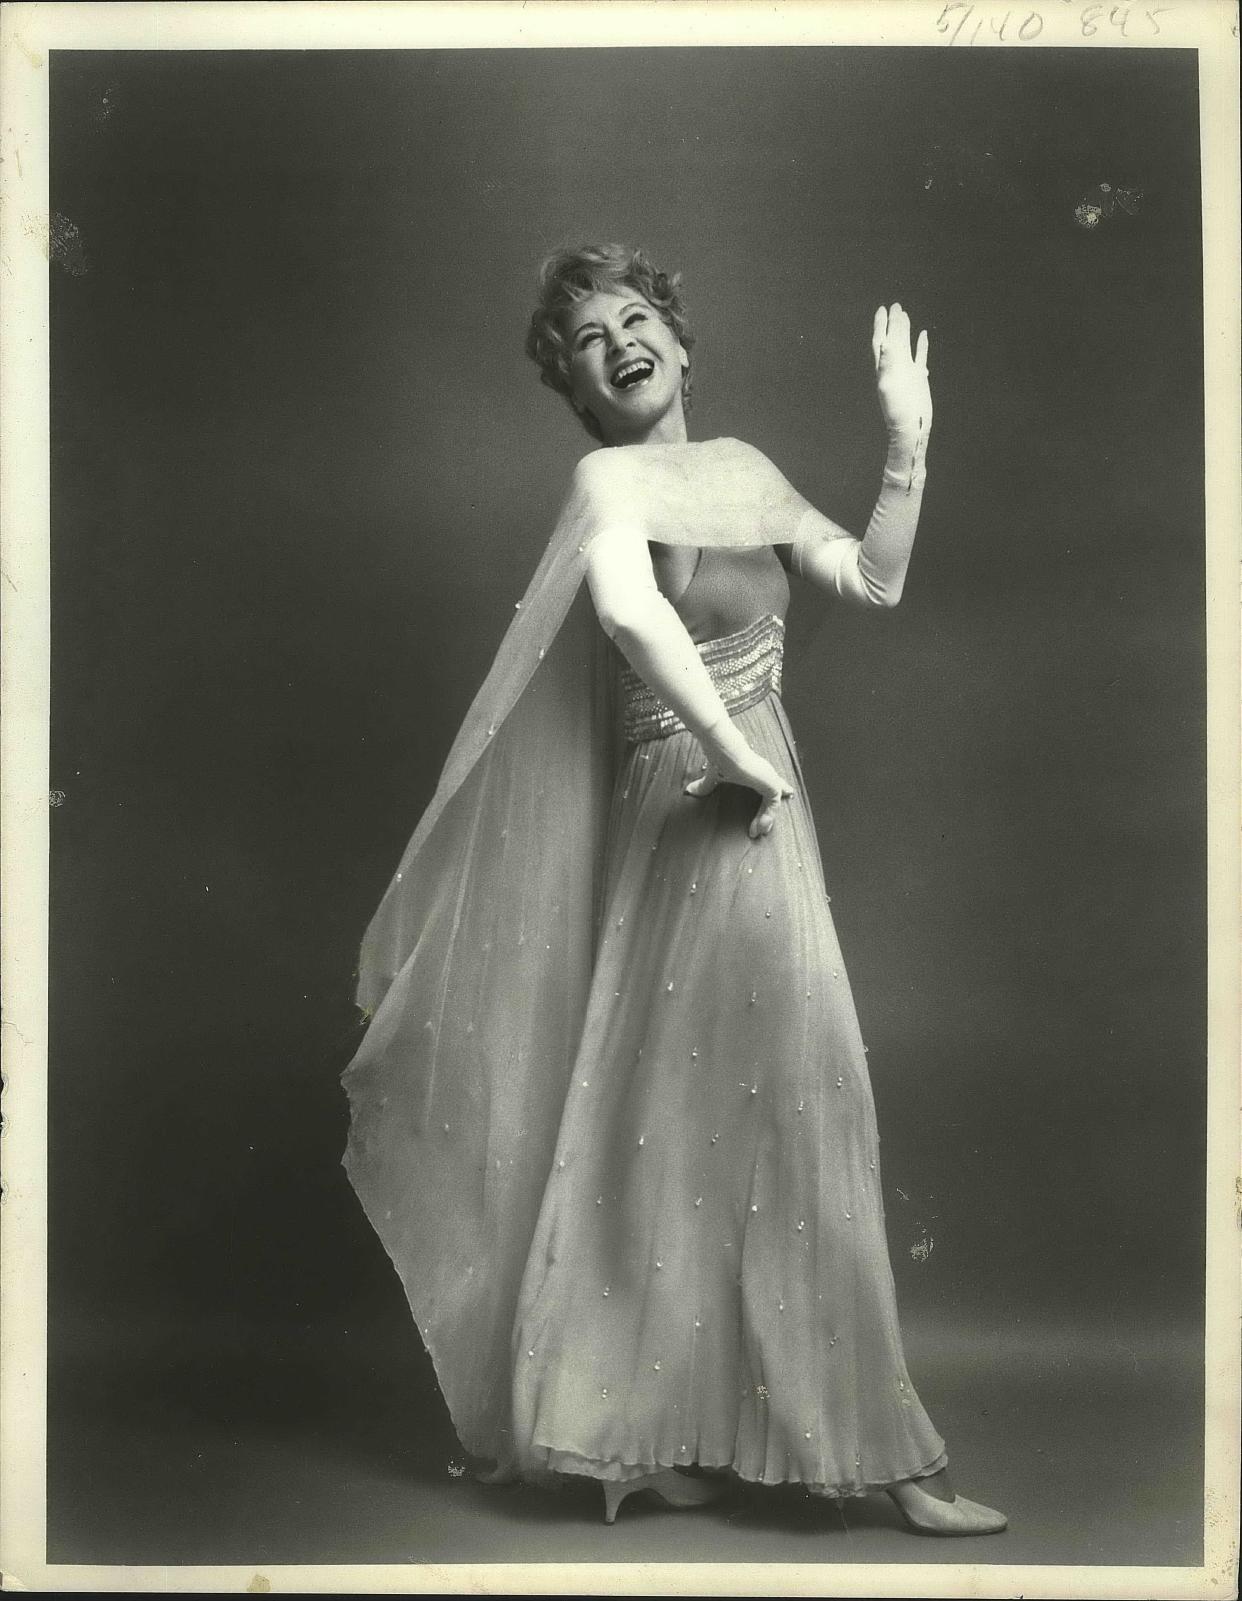 Hildegarde, born in Adell, Wisconsin, set the standard for cabaret singers for decades.